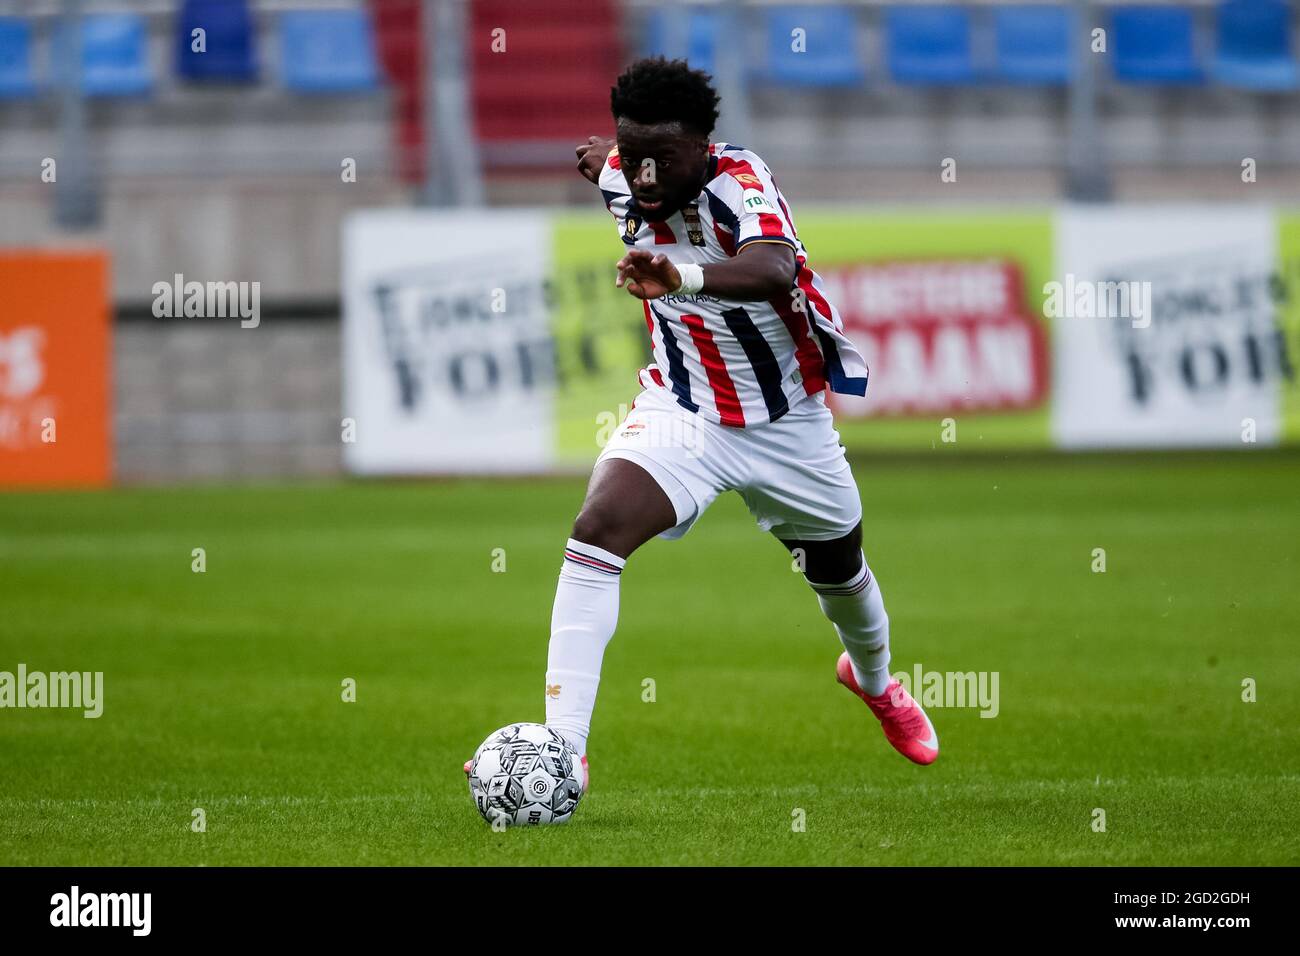 TILBURG, NETHERLANDS - AUGUST 10: Leeroy Owusu of Willem II during the Pre-season Friendly match between Willem II and Royal Excelsior Virton at the Koning Willem II Stadion on August 10, 2021 in Tilburg, Netherlands (Photo by Broer van den Boom/Orange Pictures) Stock Photo